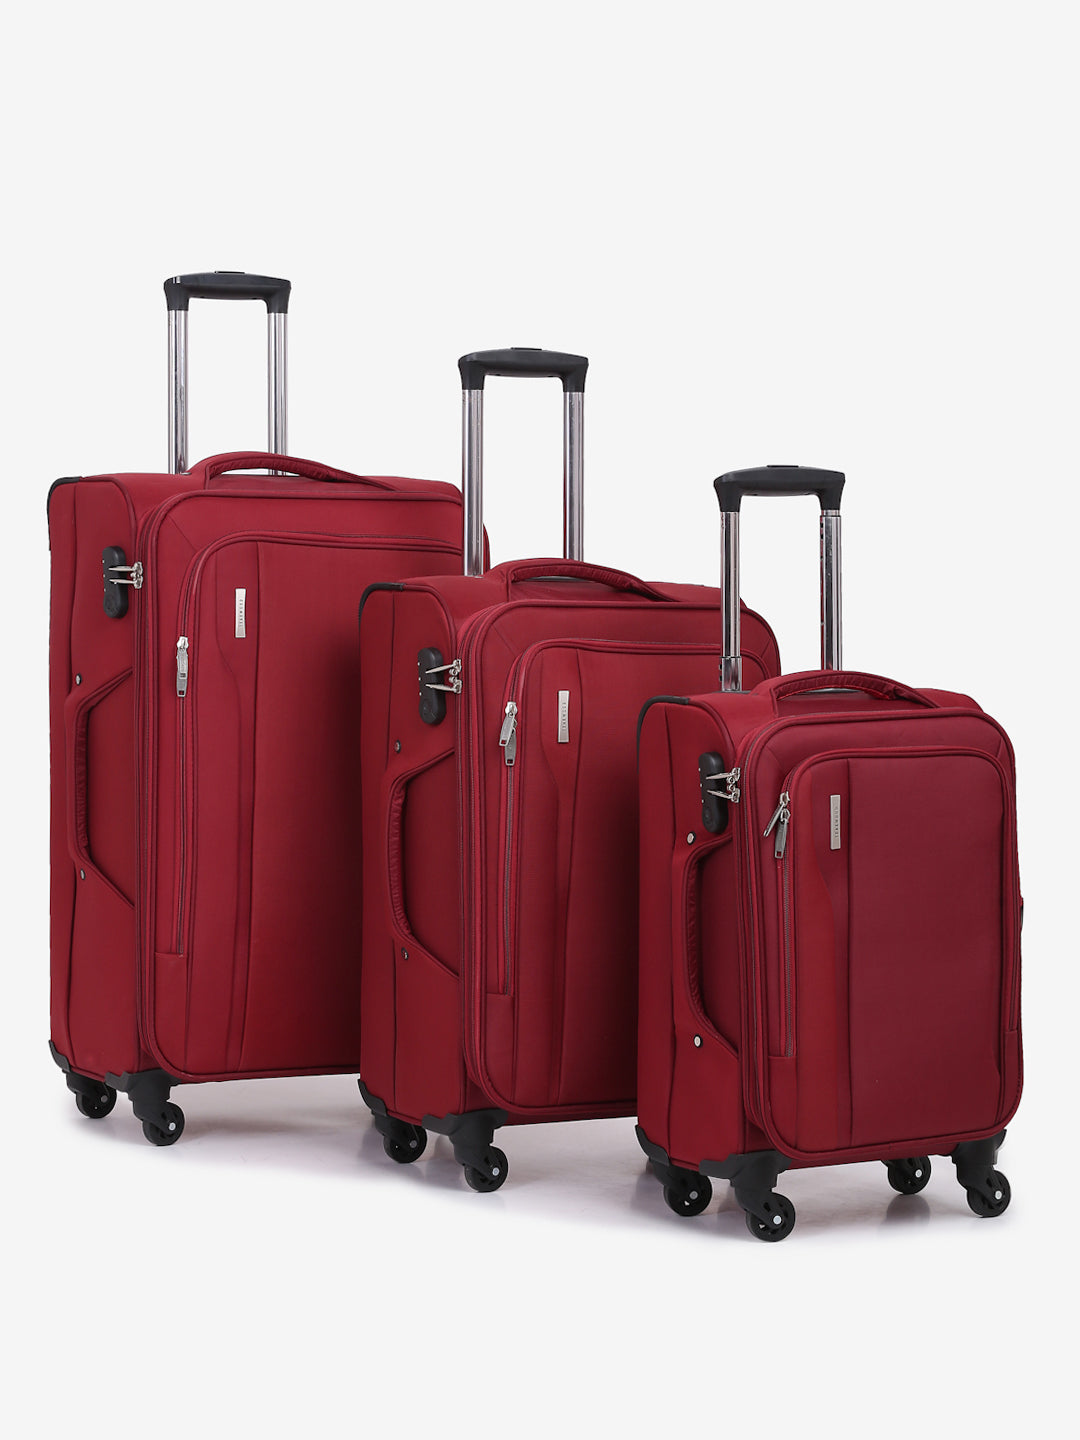 This Luggage Set Comes With Individual Packing Cubes